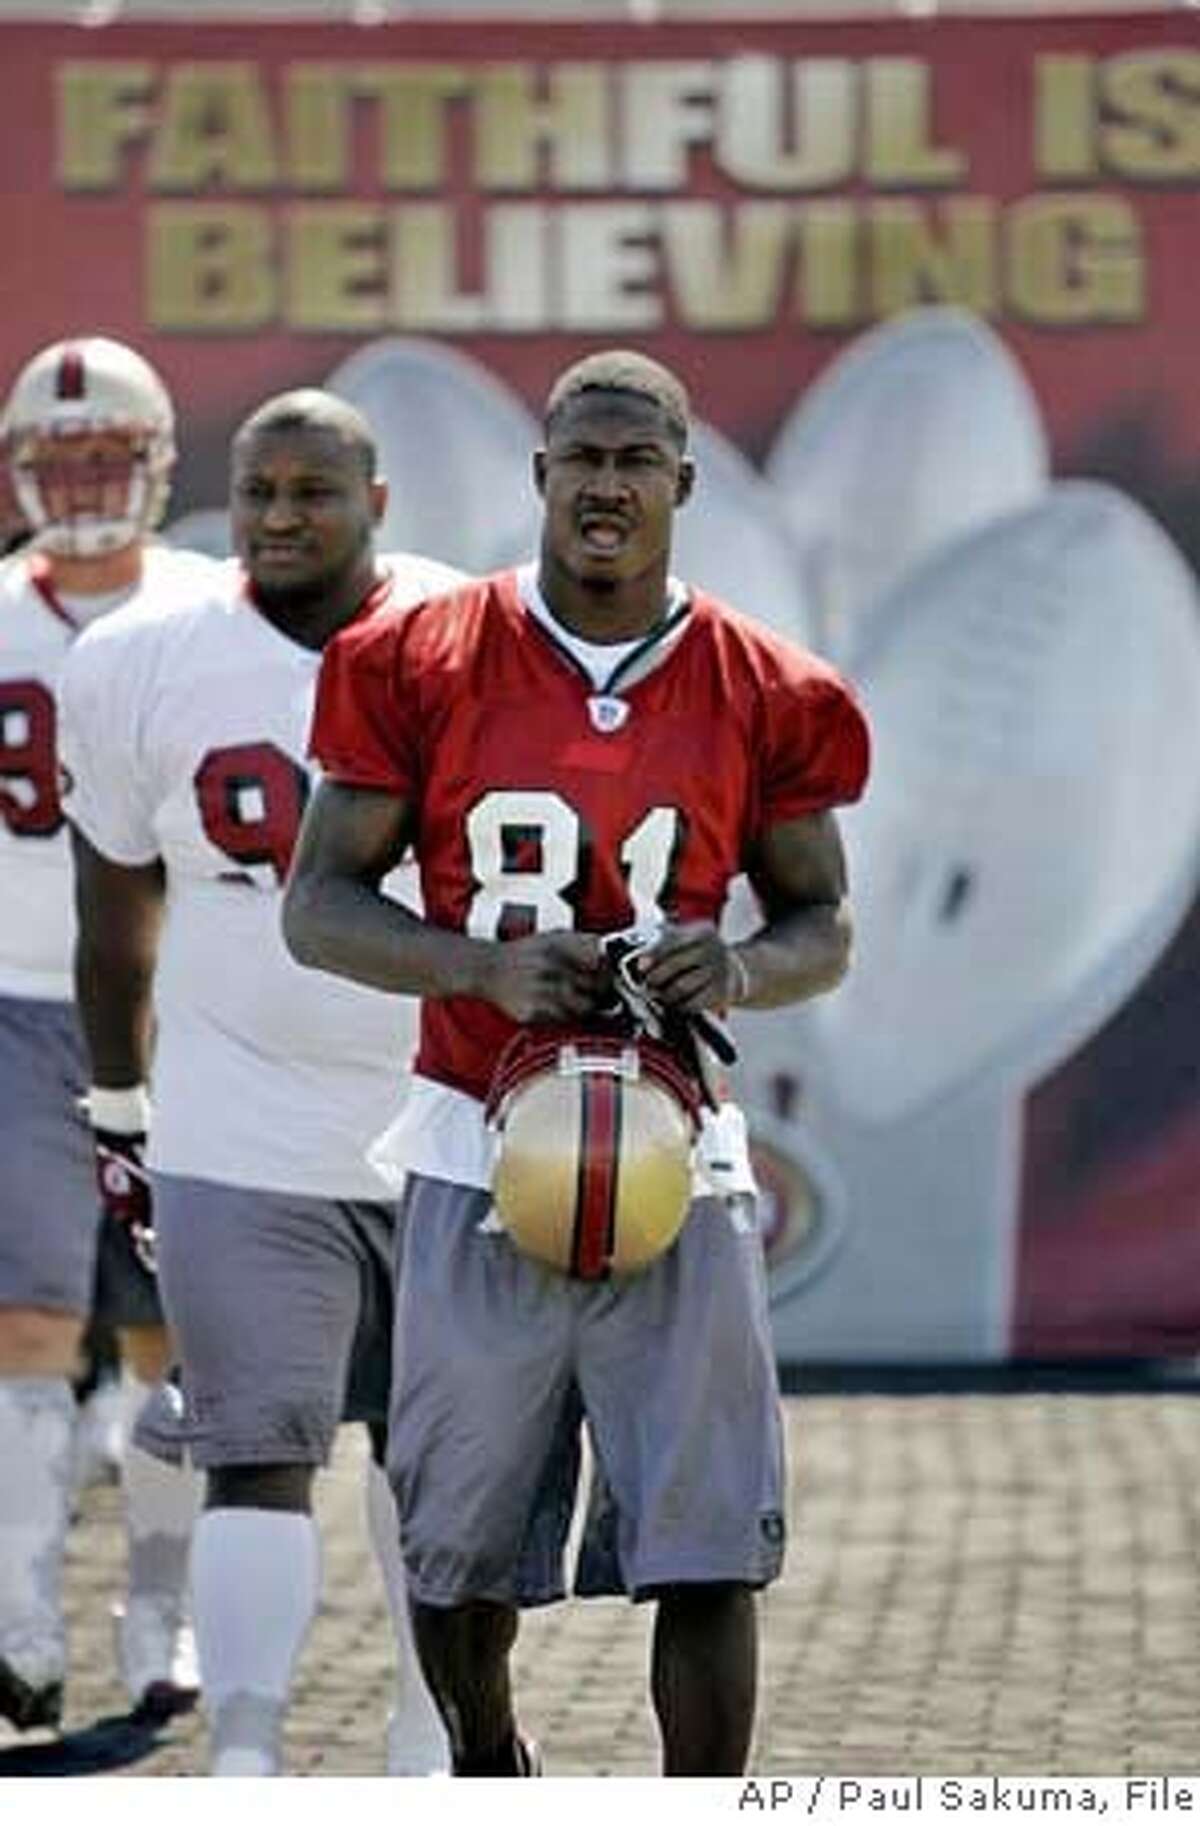 ** FILE ** San Francisco 49ers wide receiver Antonio Bryant (81) arrives at football training camp in Santa Clara, Calif., in a July 28, 2006, file photo. Bryant was suspended for four games Friday, Dec. 22, 2006, for violating the NFL's substance abuse policy, dealing a blow to the 49ers' faint playoff hopes. (AP Photo/Paul Sakuma) JULY 28, 2006, FILE PHOTO EFE OUT